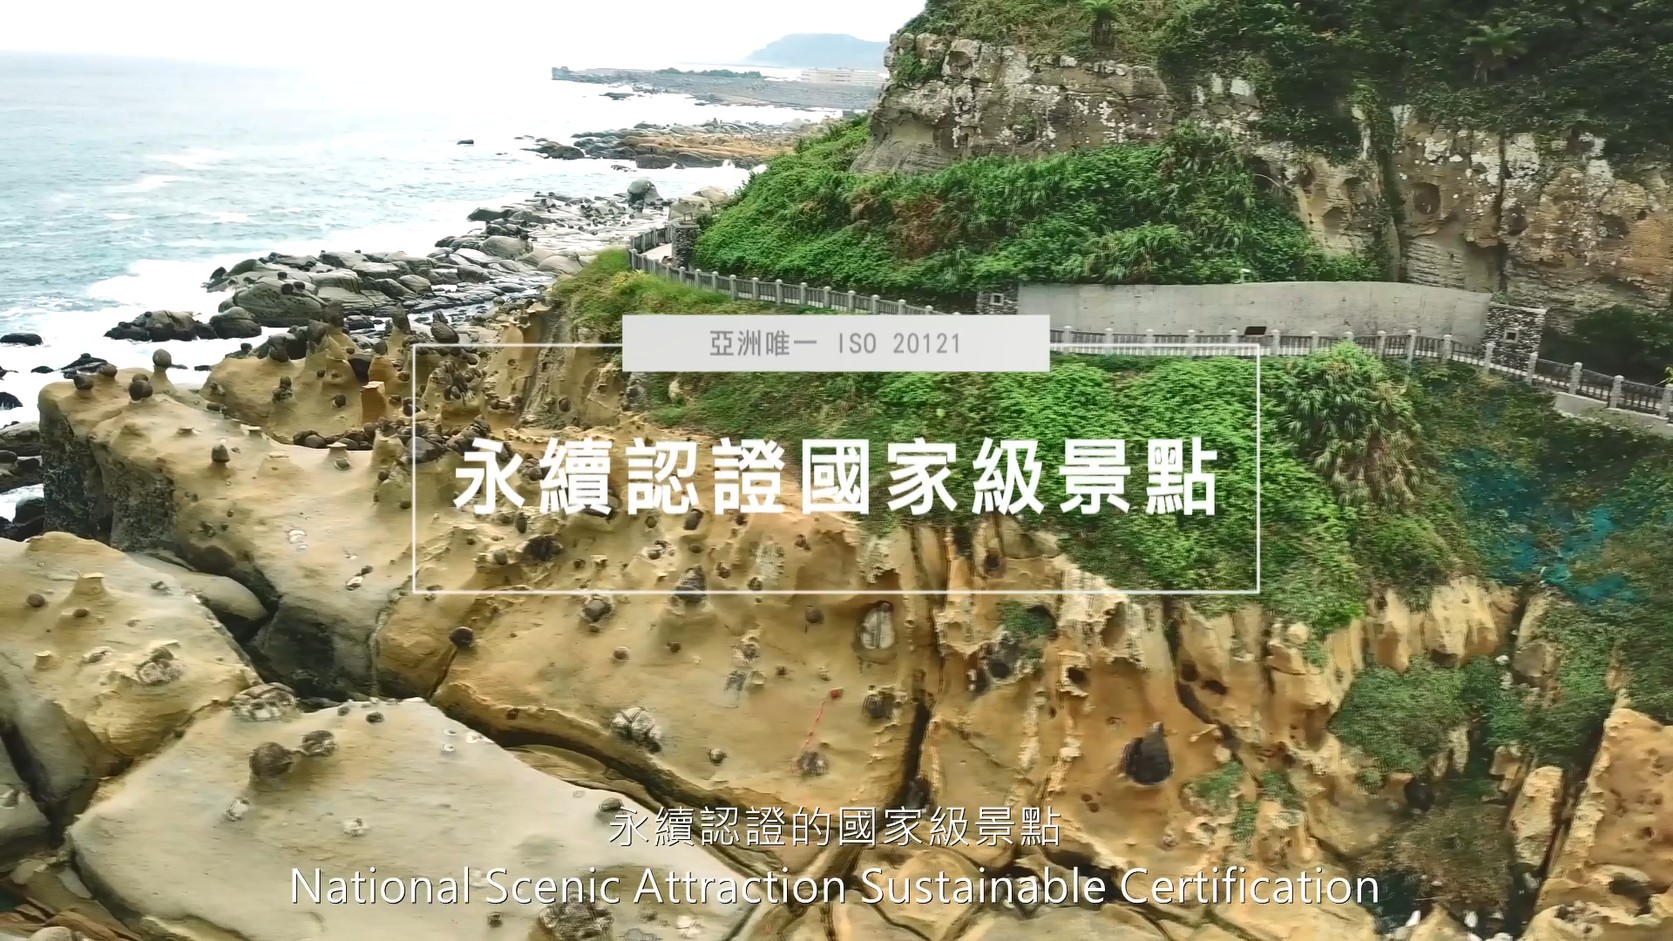  Heping Island Park Promotional Video